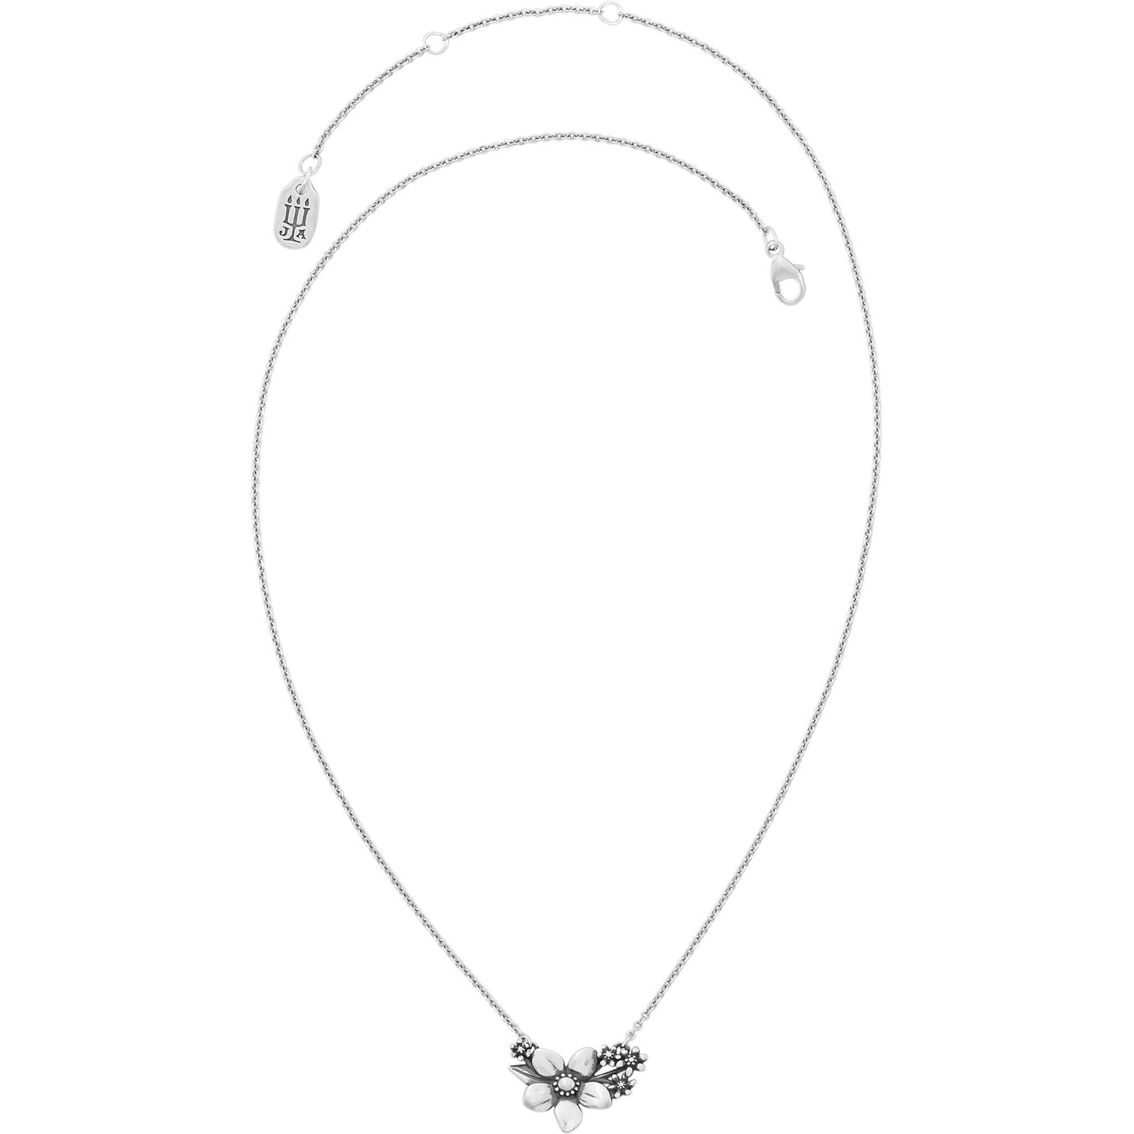 James Avery Garden Bouquet Necklace - Image 2 of 2